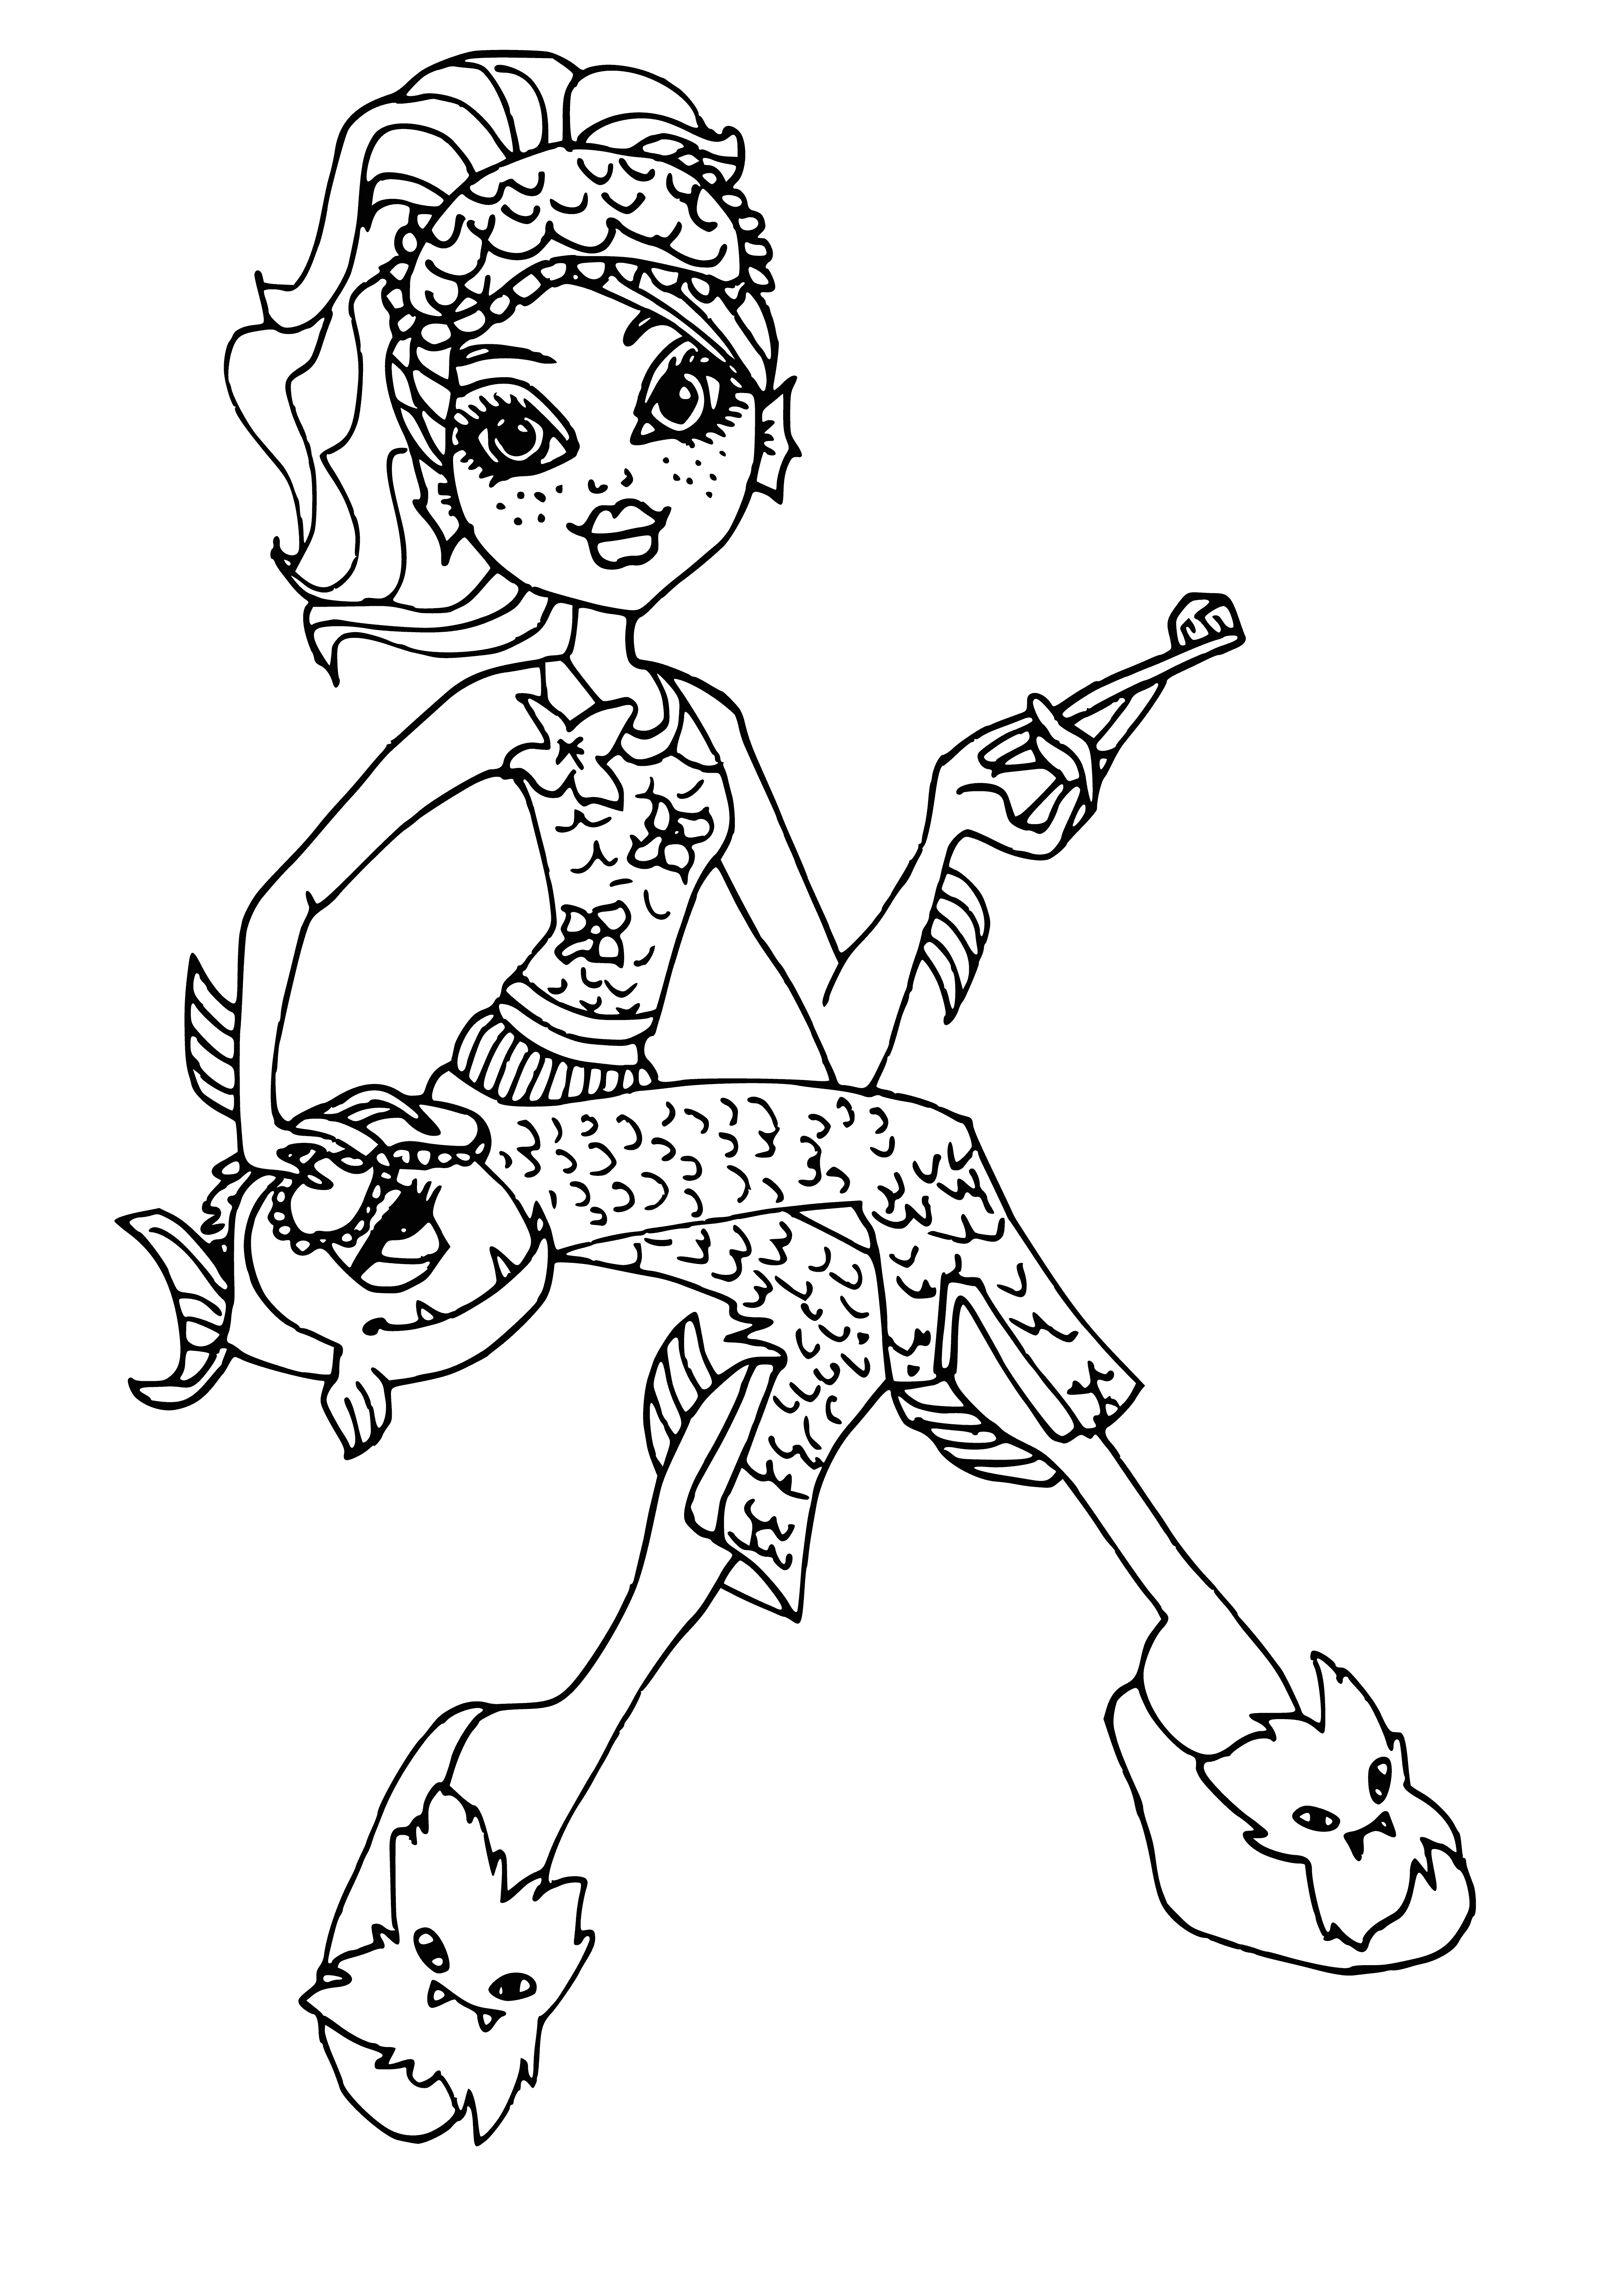 coloring page: Lagoona Blue is a teenage girl who enjoys water and the beauty of coral reefs. She wears a white bikini and skirt adorned with vibrant colors and has a pink flower in her hair.